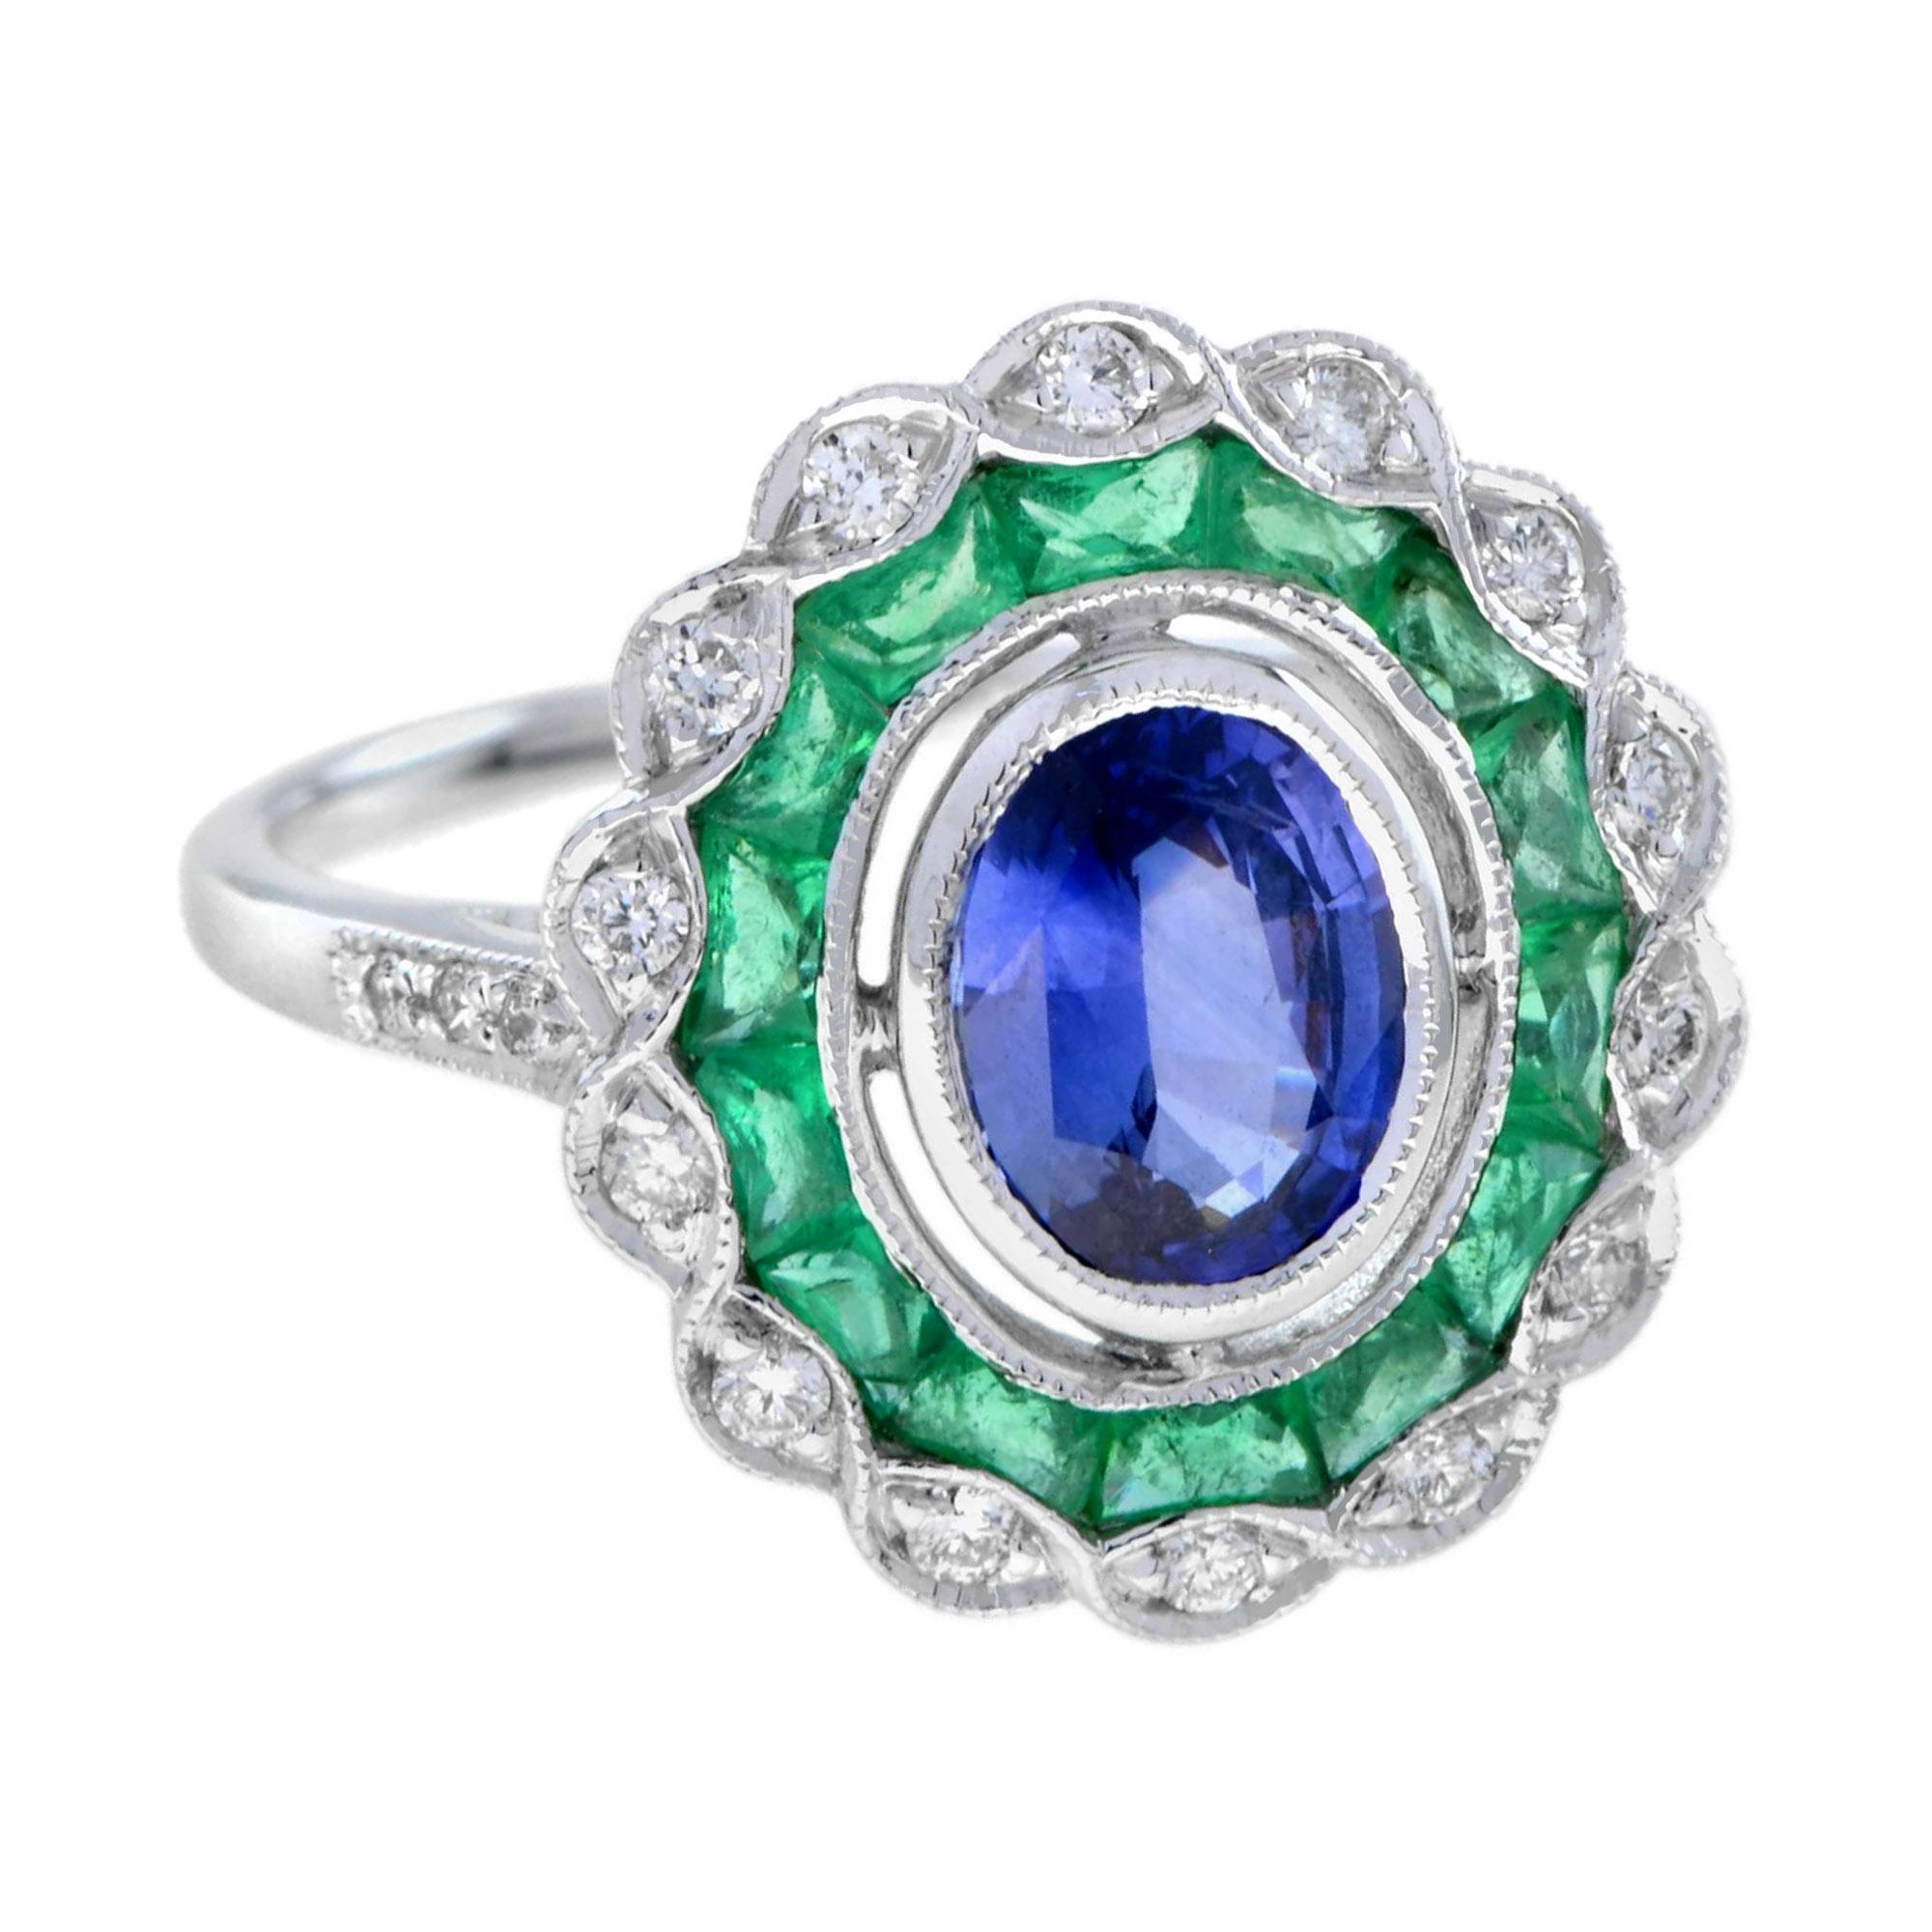 Oval Cut Oval Ceylon Sapphire with Emerald Diamond Art Deco Style Halo Ring in White Gold For Sale